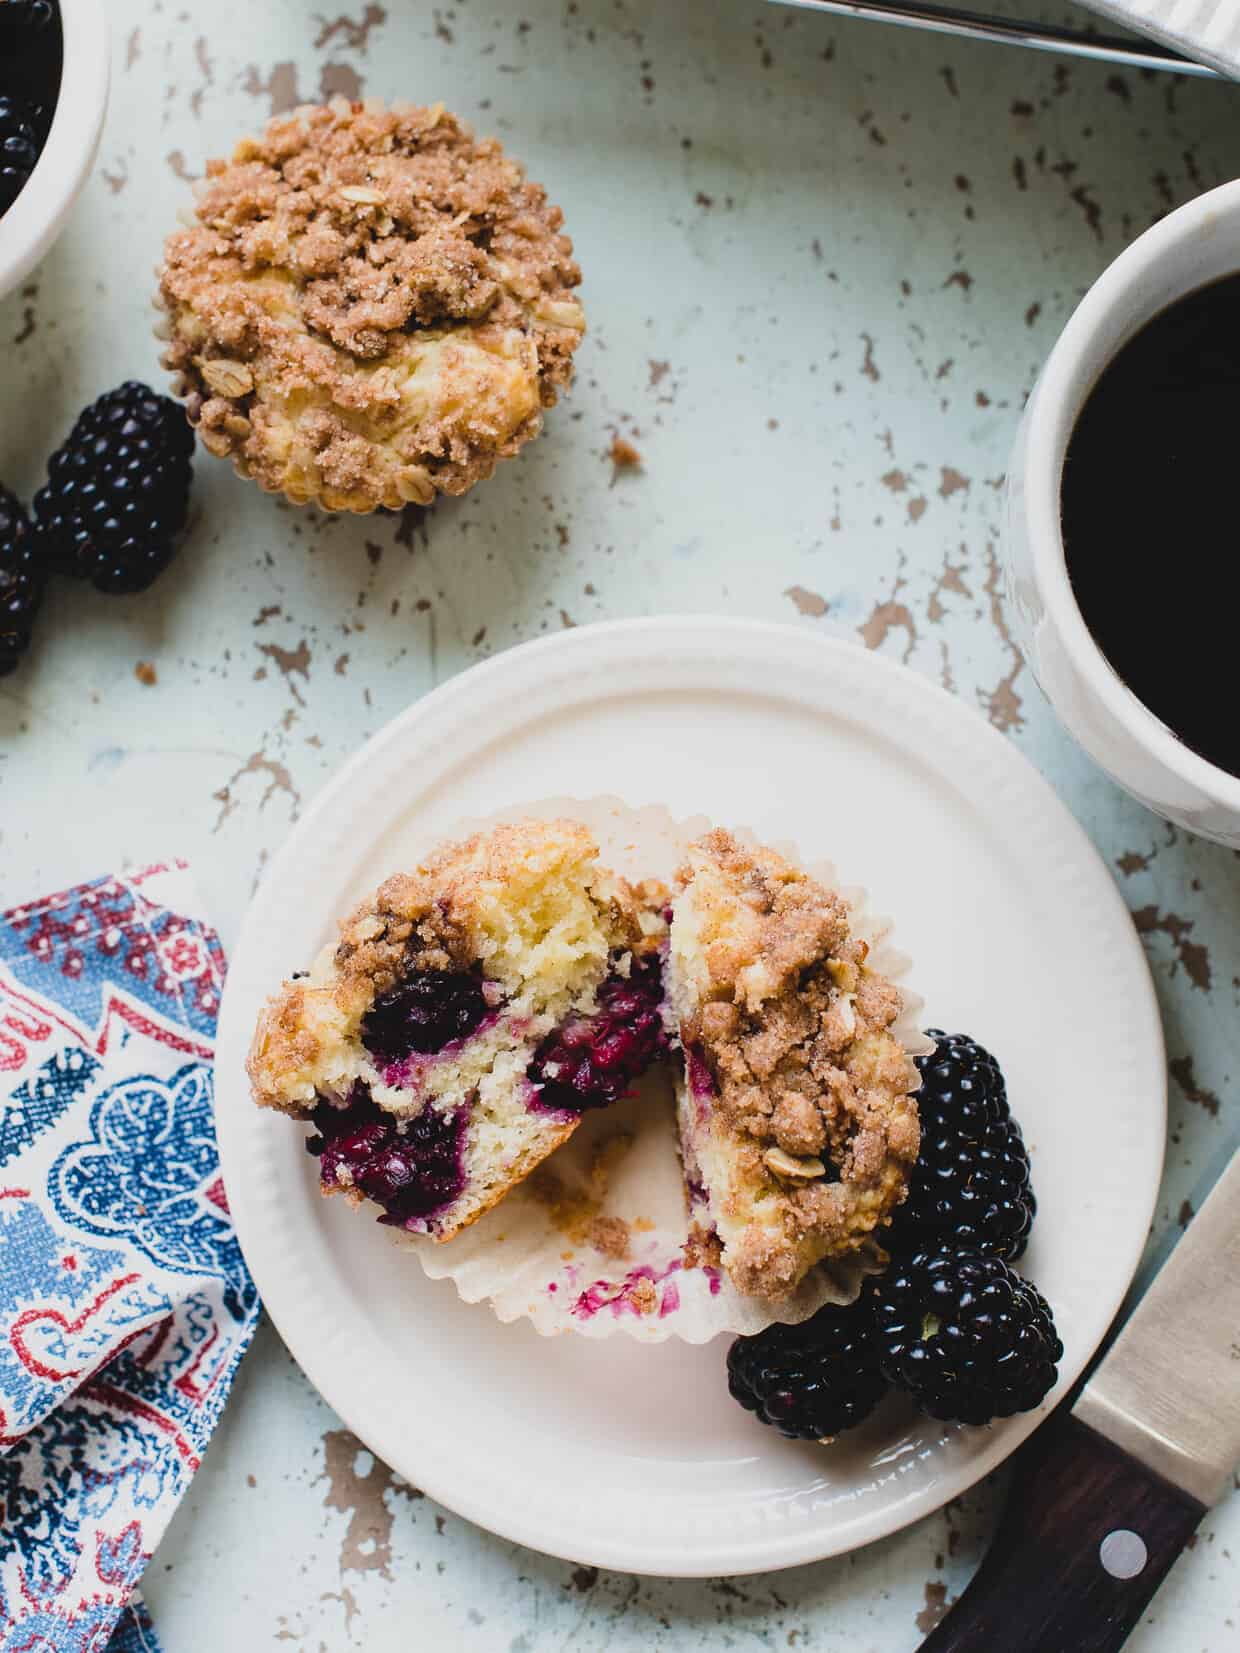 Blackberry Yogurt Muffin cut in half and served on a white plate surrounded by blackberries.